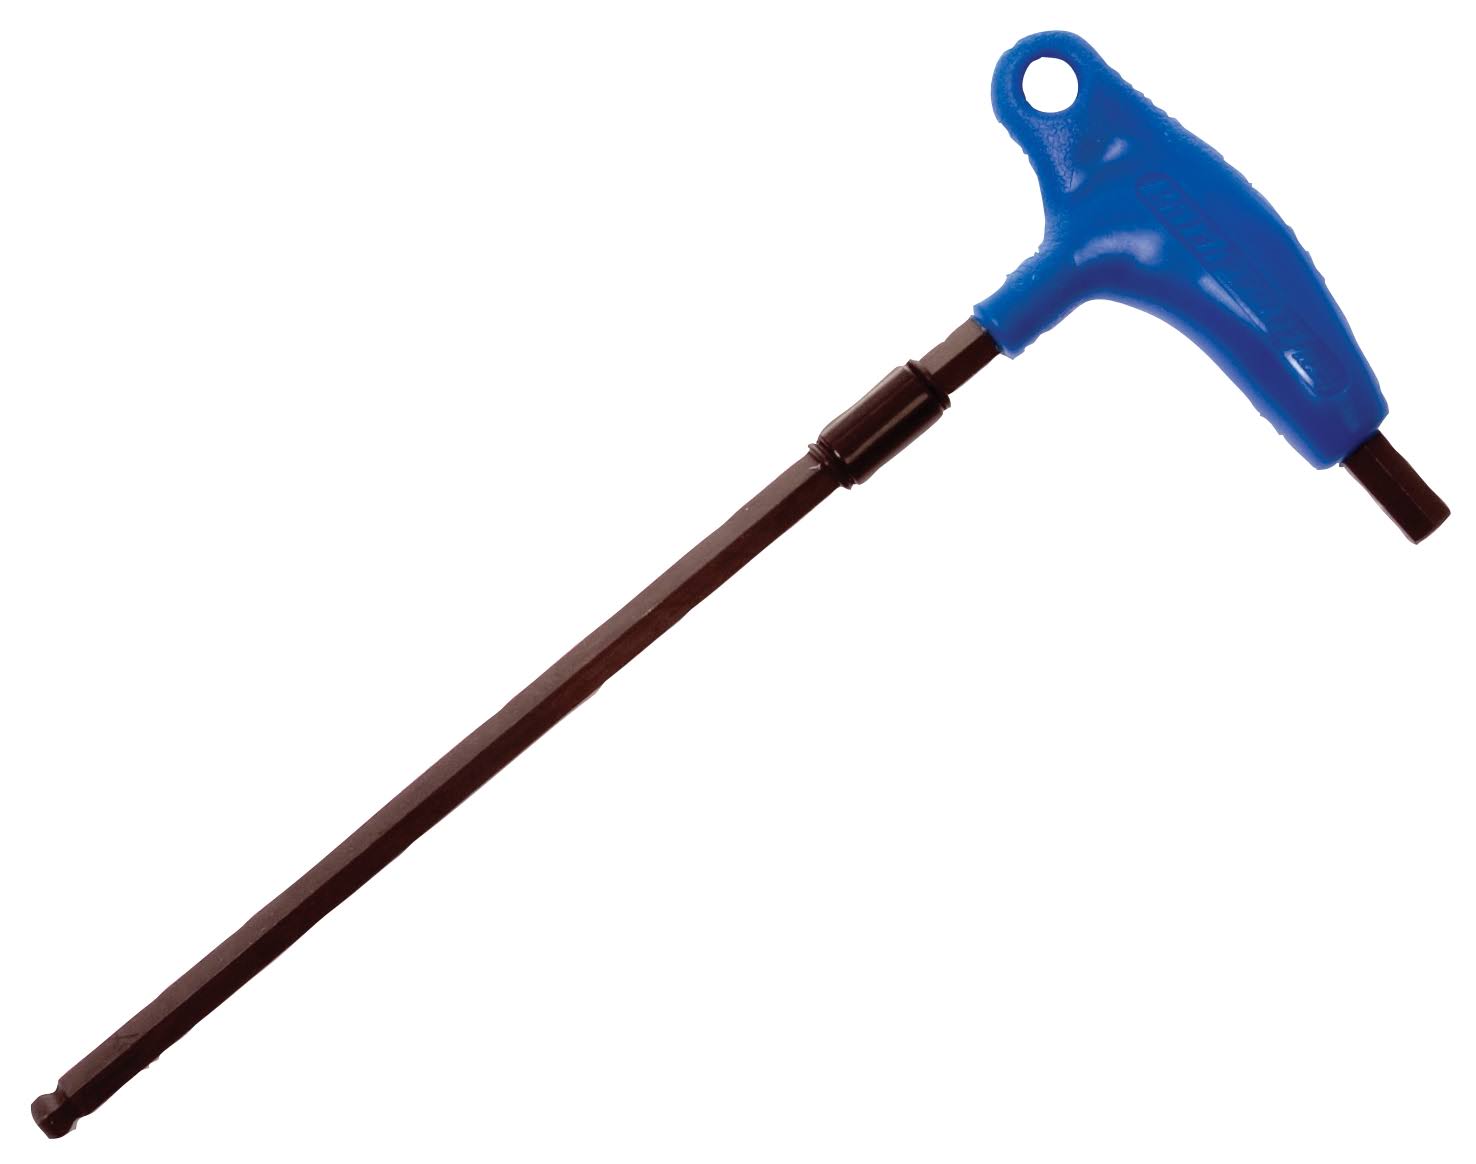 Park Tool PH-4 P-Handle Hex Wrench - 4mm